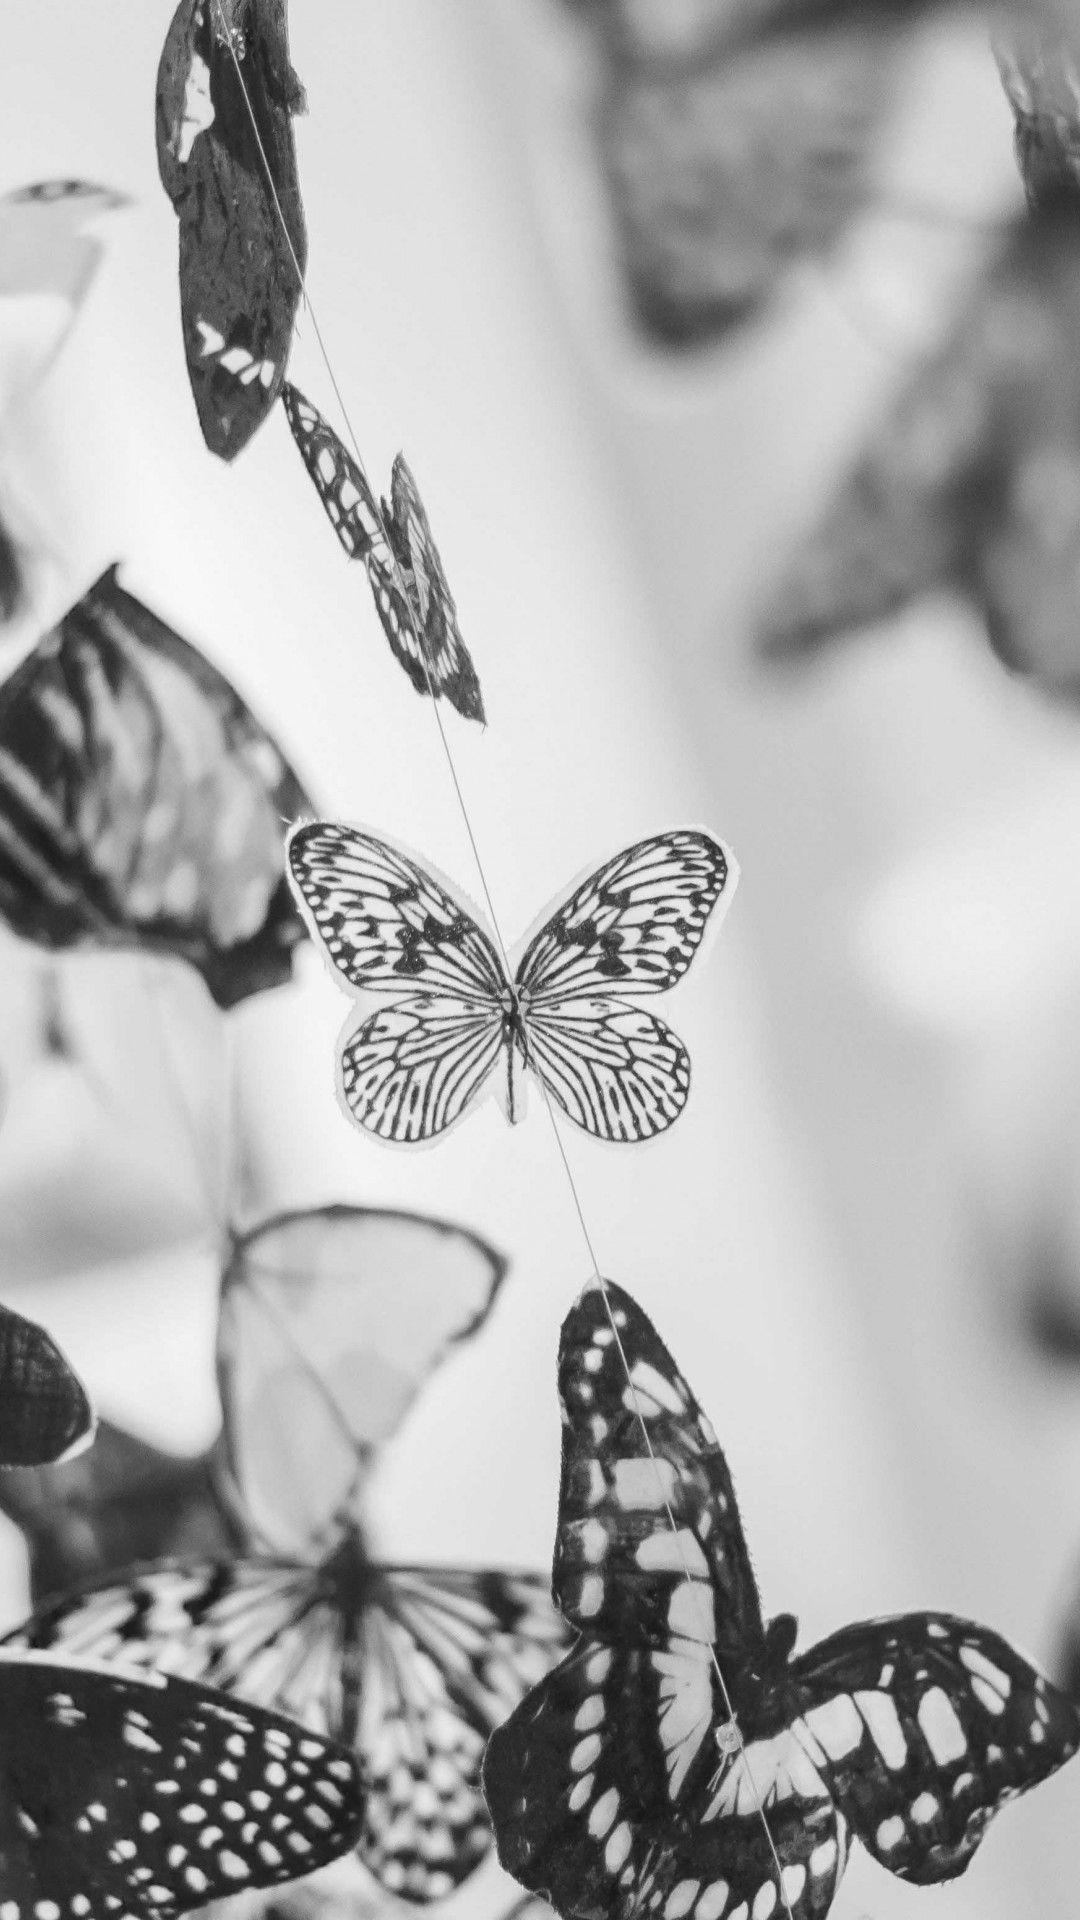 Black and White Butterfly Wallpapers - Top Free Black and White Butterfly Backgrounds